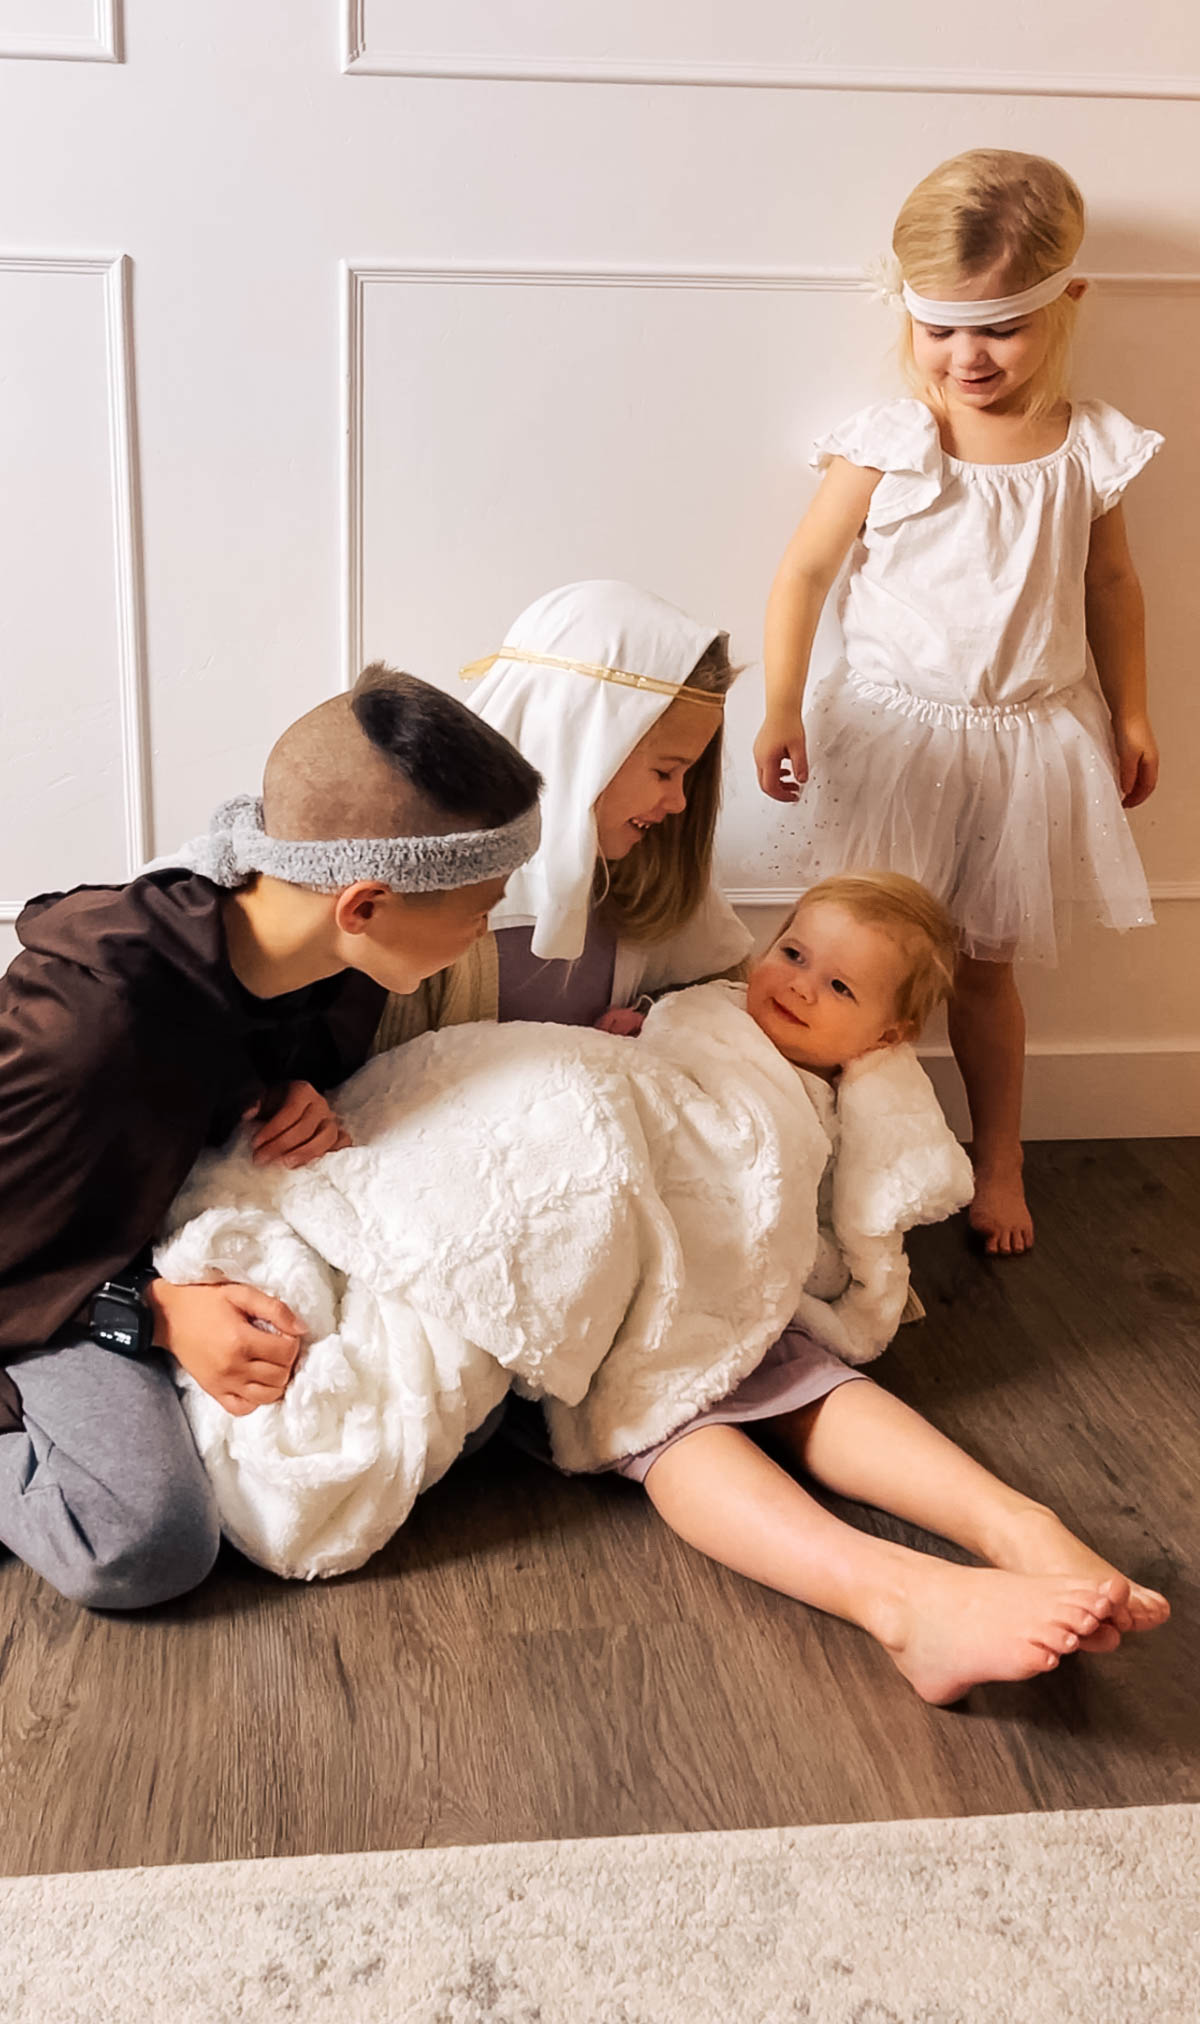 Four children dressed in costumes act out the nativity scene in a living room.